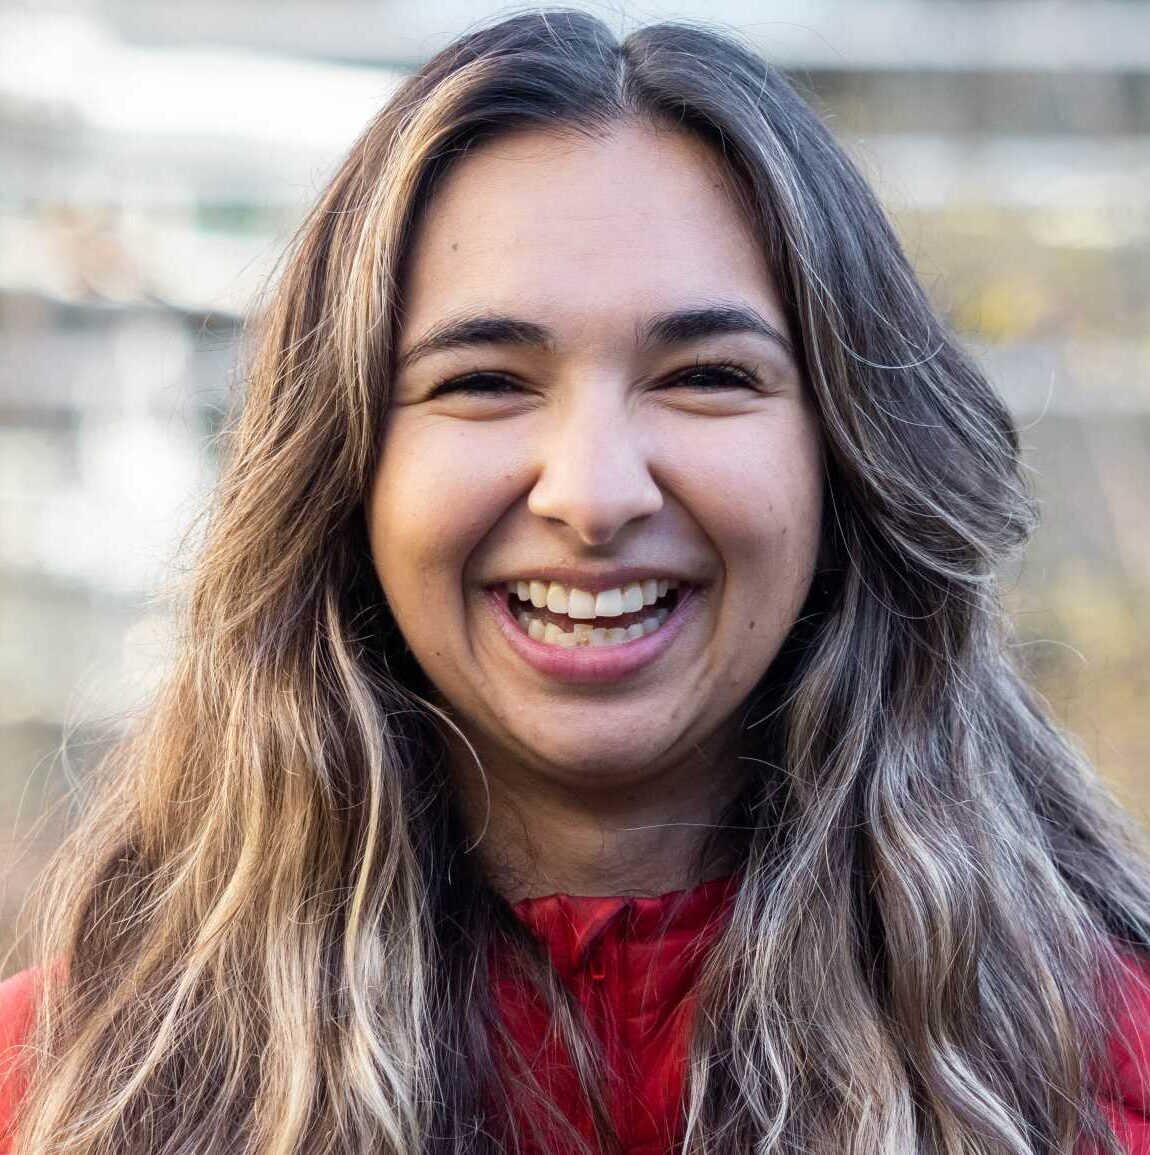 Persia Khan, Research Associate and Liaison for Raincoast, looks straight at the camera with a giant grint, showing off her teeth and crinkling her eyes. Her hair is a wavy mix of blonde and brown, settling over her shoulders while wearing a red puffy jacket.